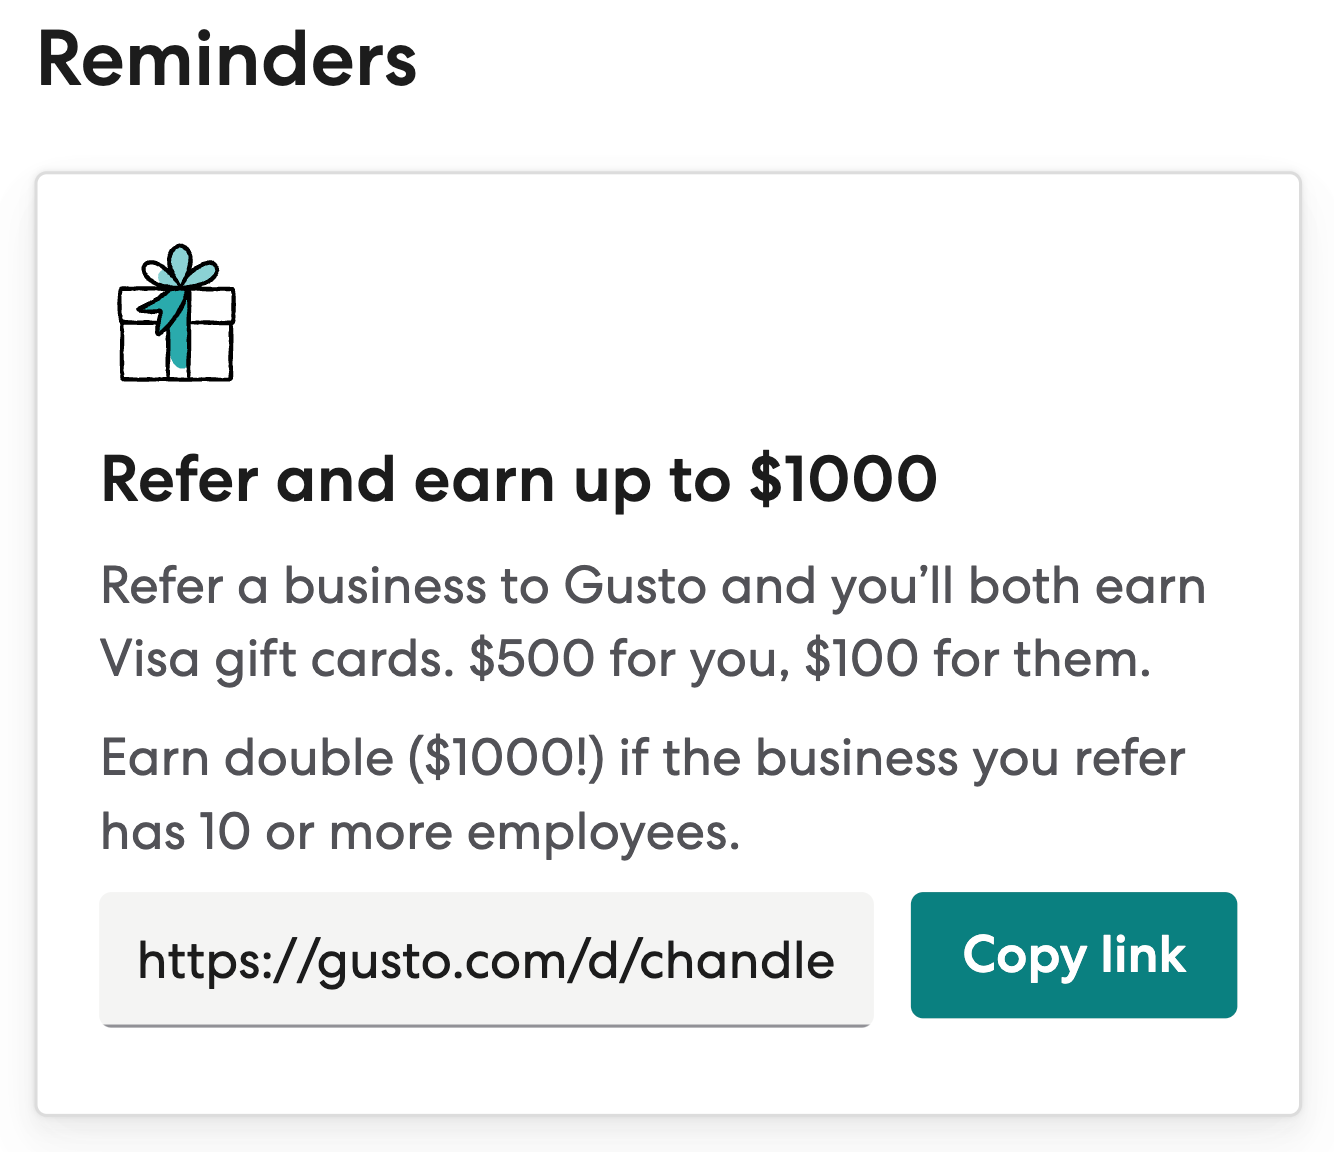 Gusto_referral_offer.png